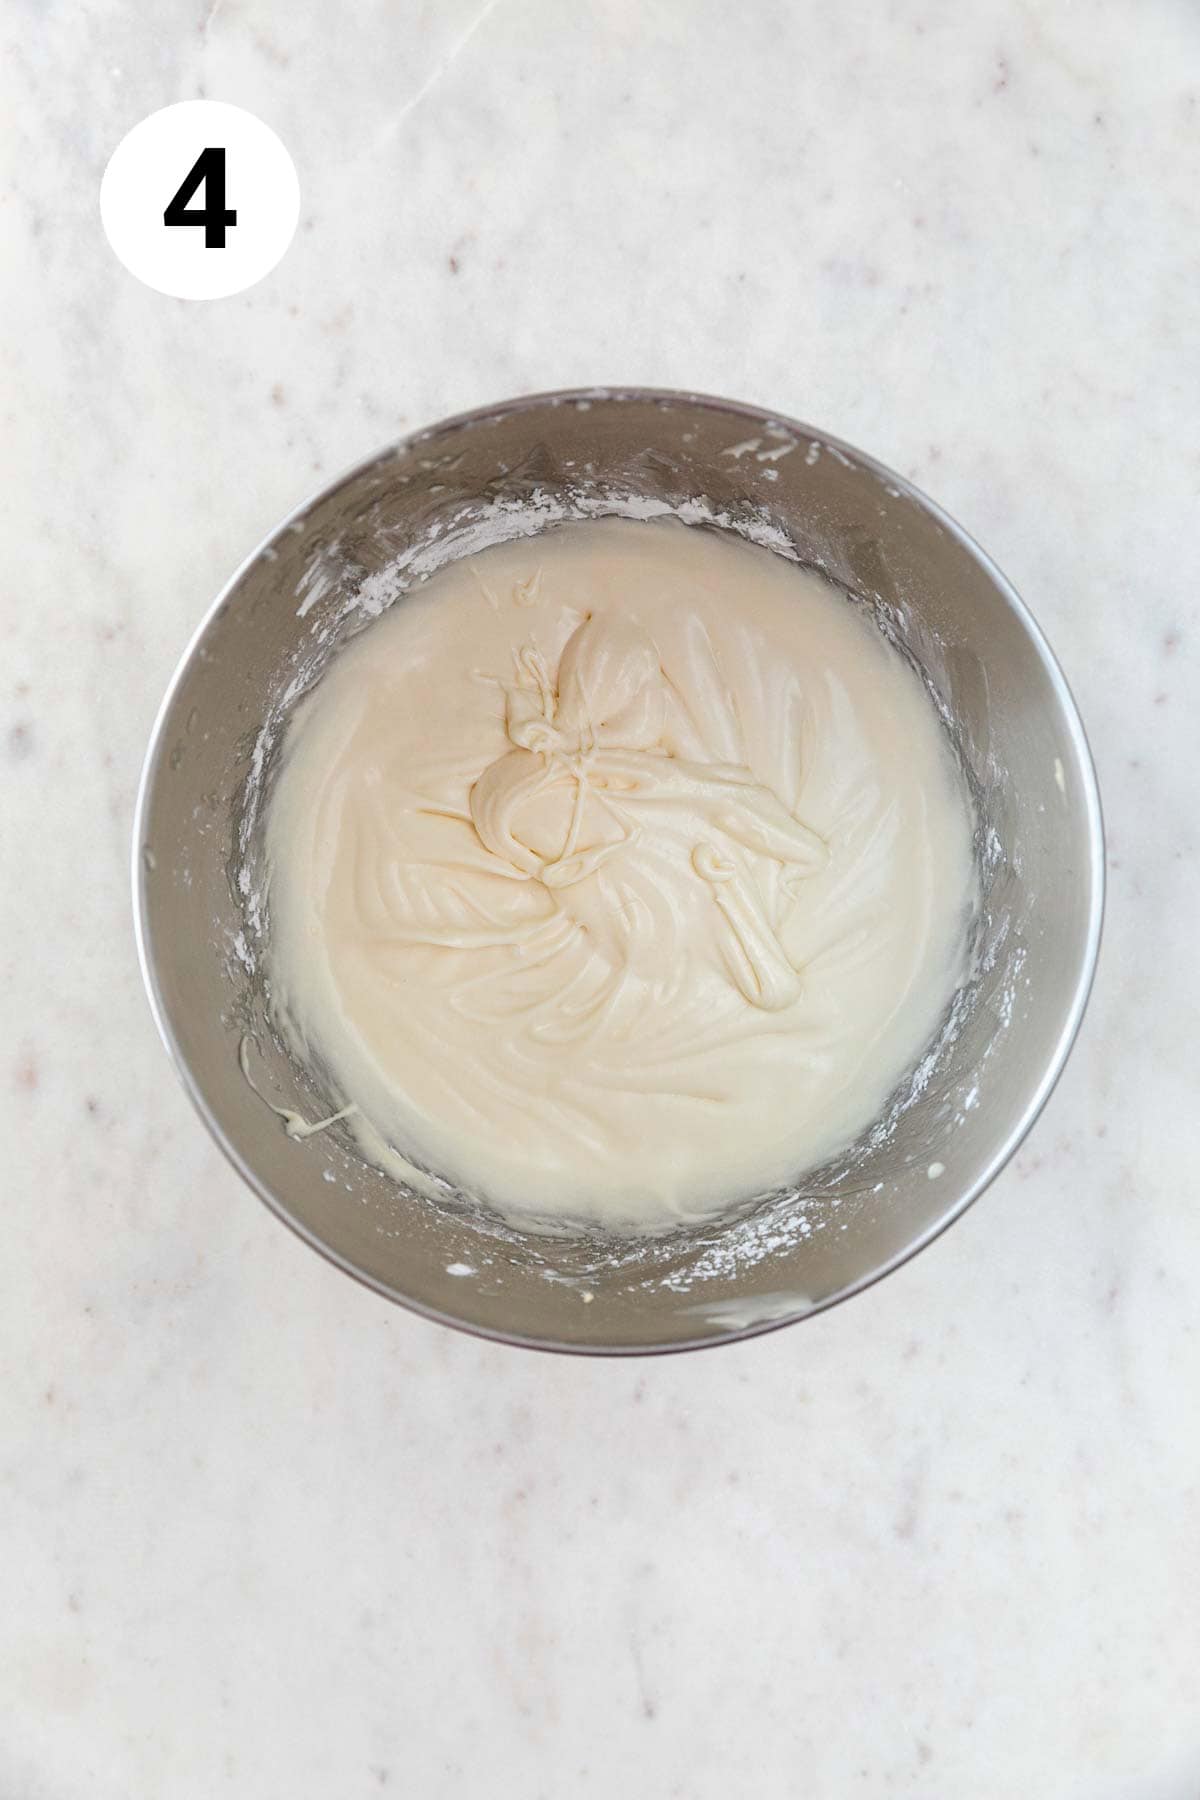 Vegan cream cheese frosting in the bowl of an electric mixer.